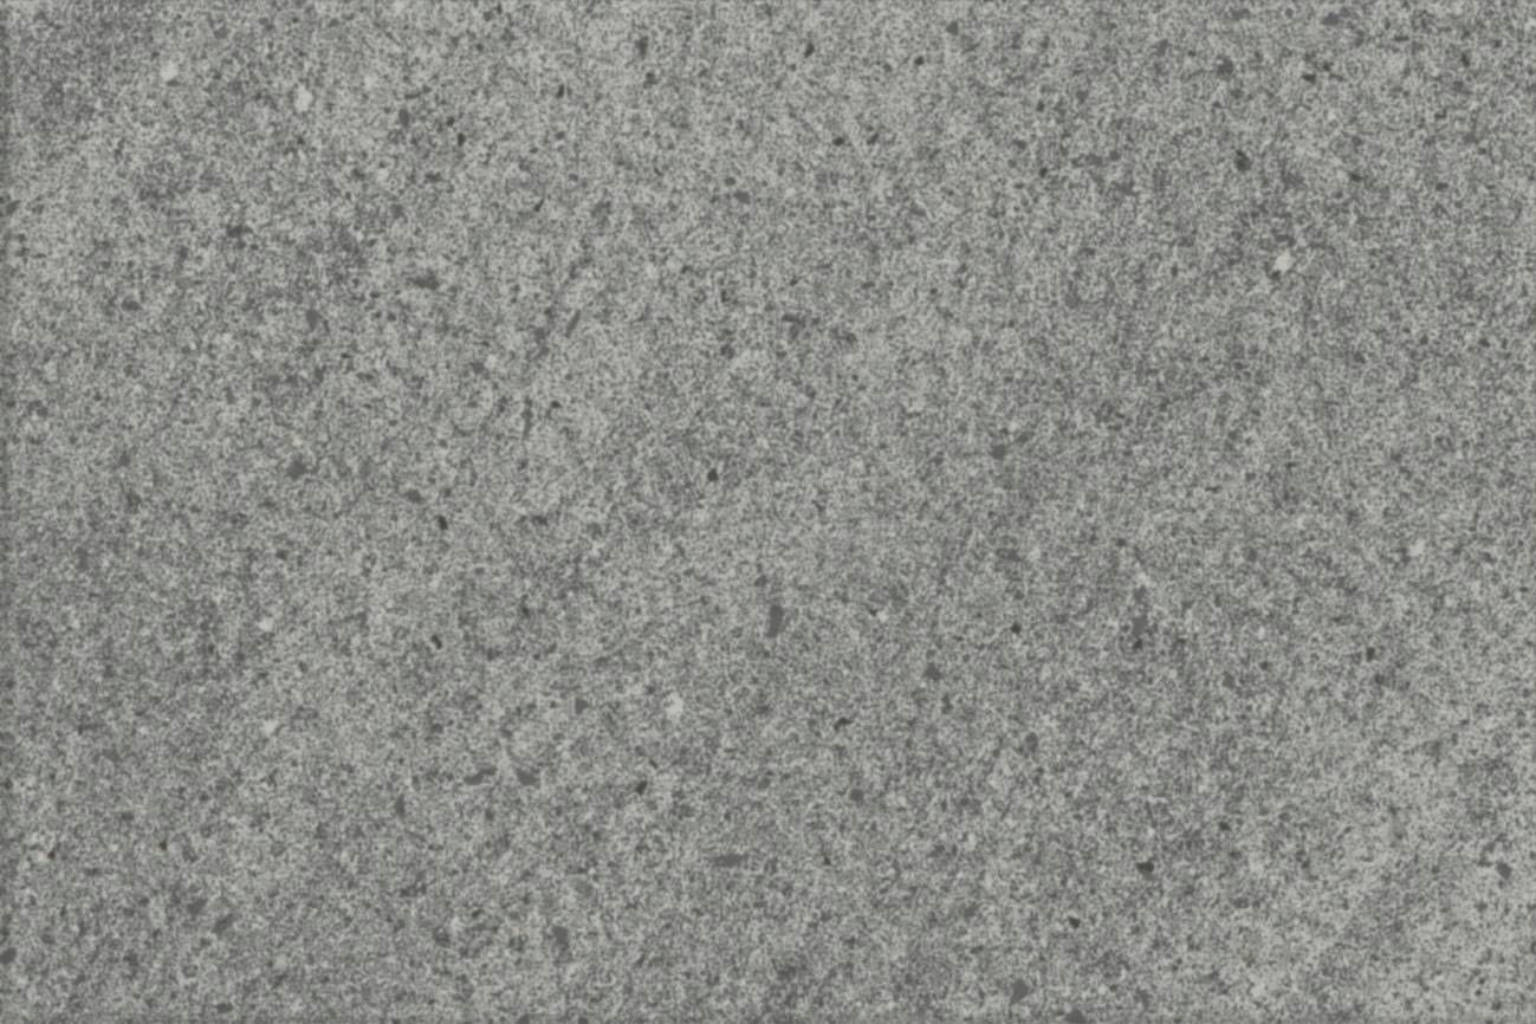 Aran Grey Texture | Stones & More | Finest selection of Mosaics, Glass, Tile and Stone